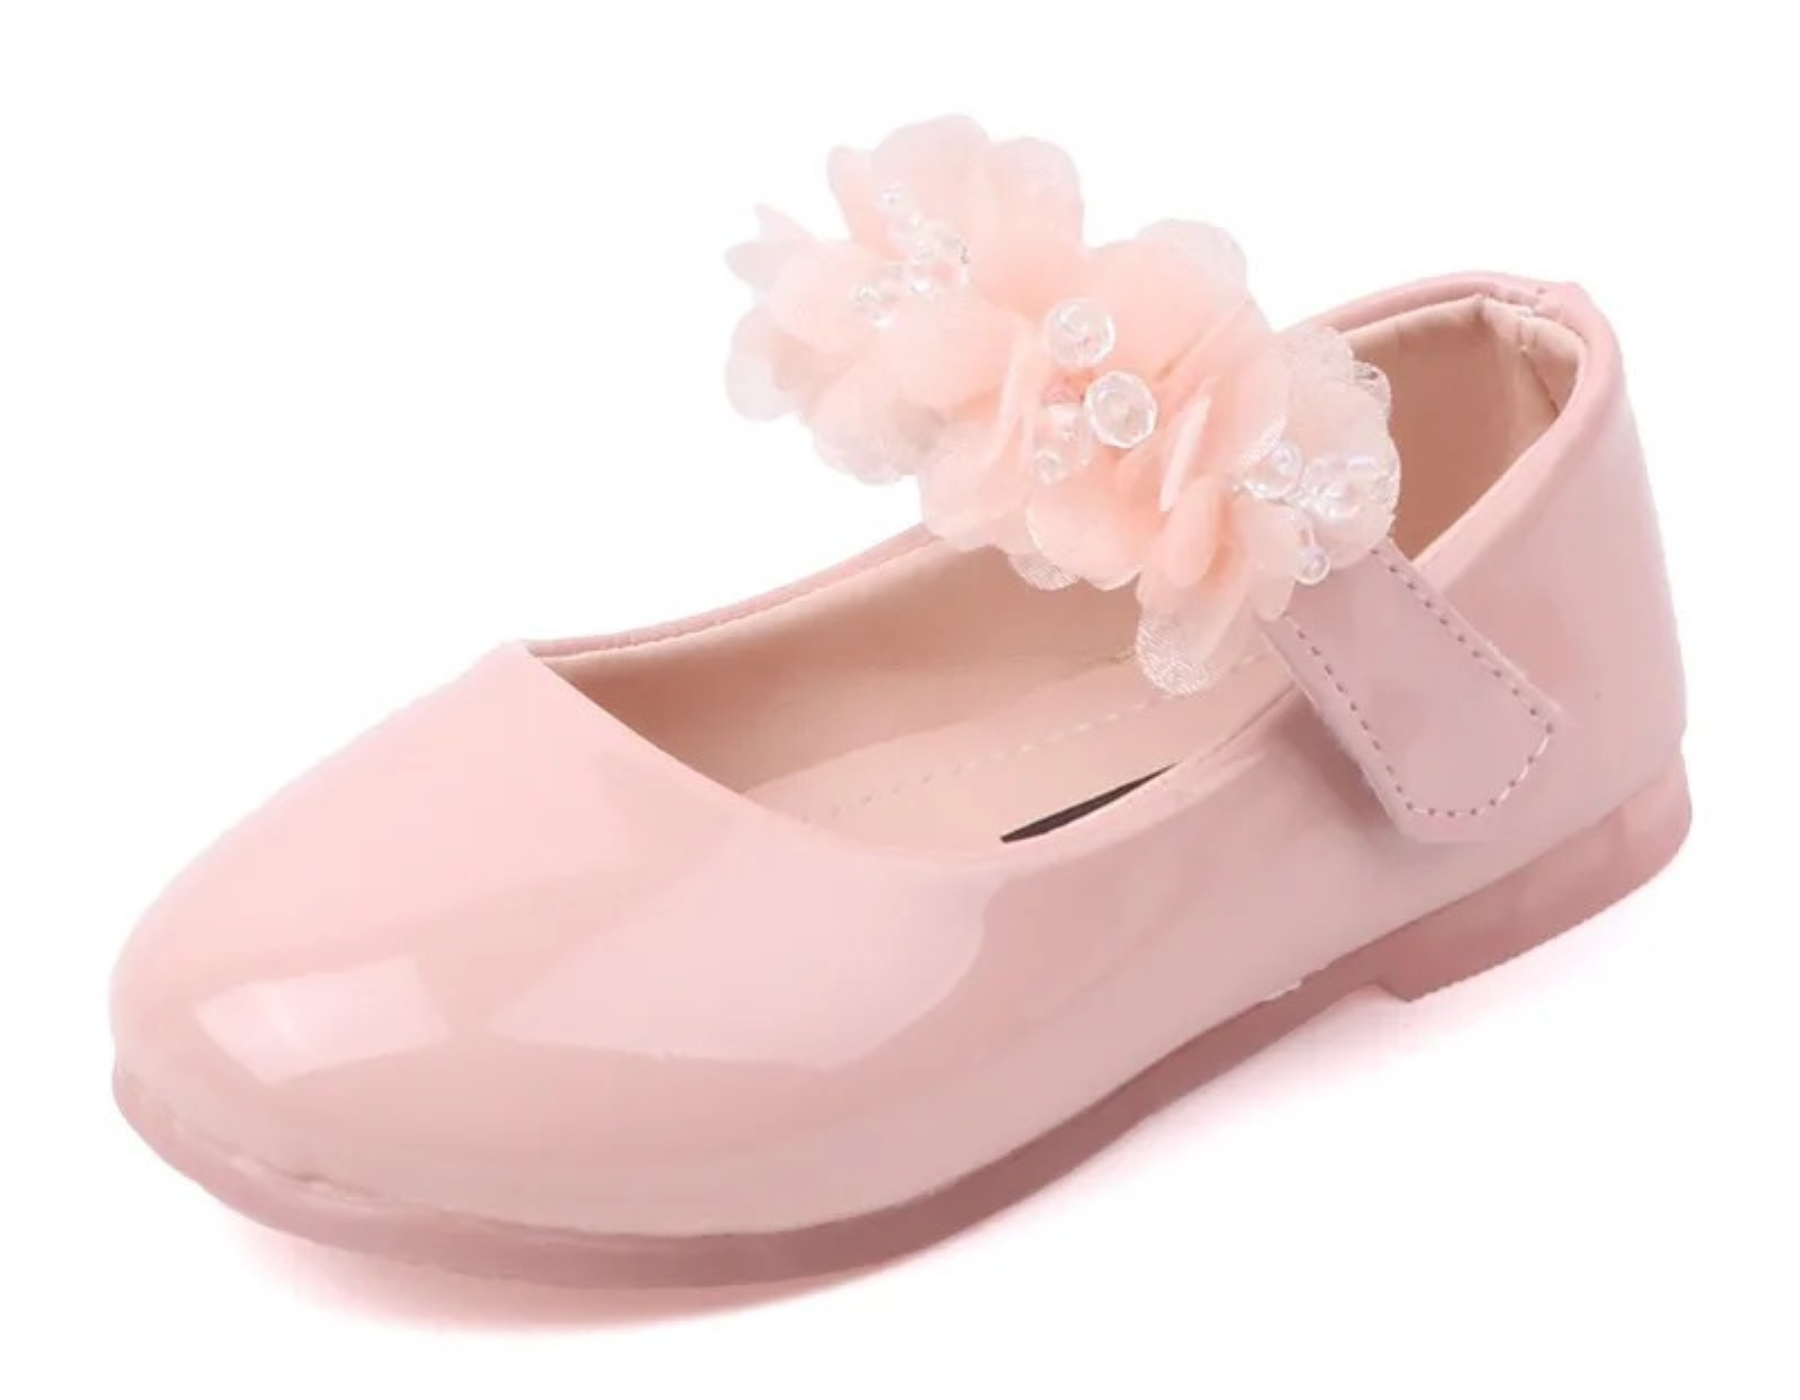 flower shoes.